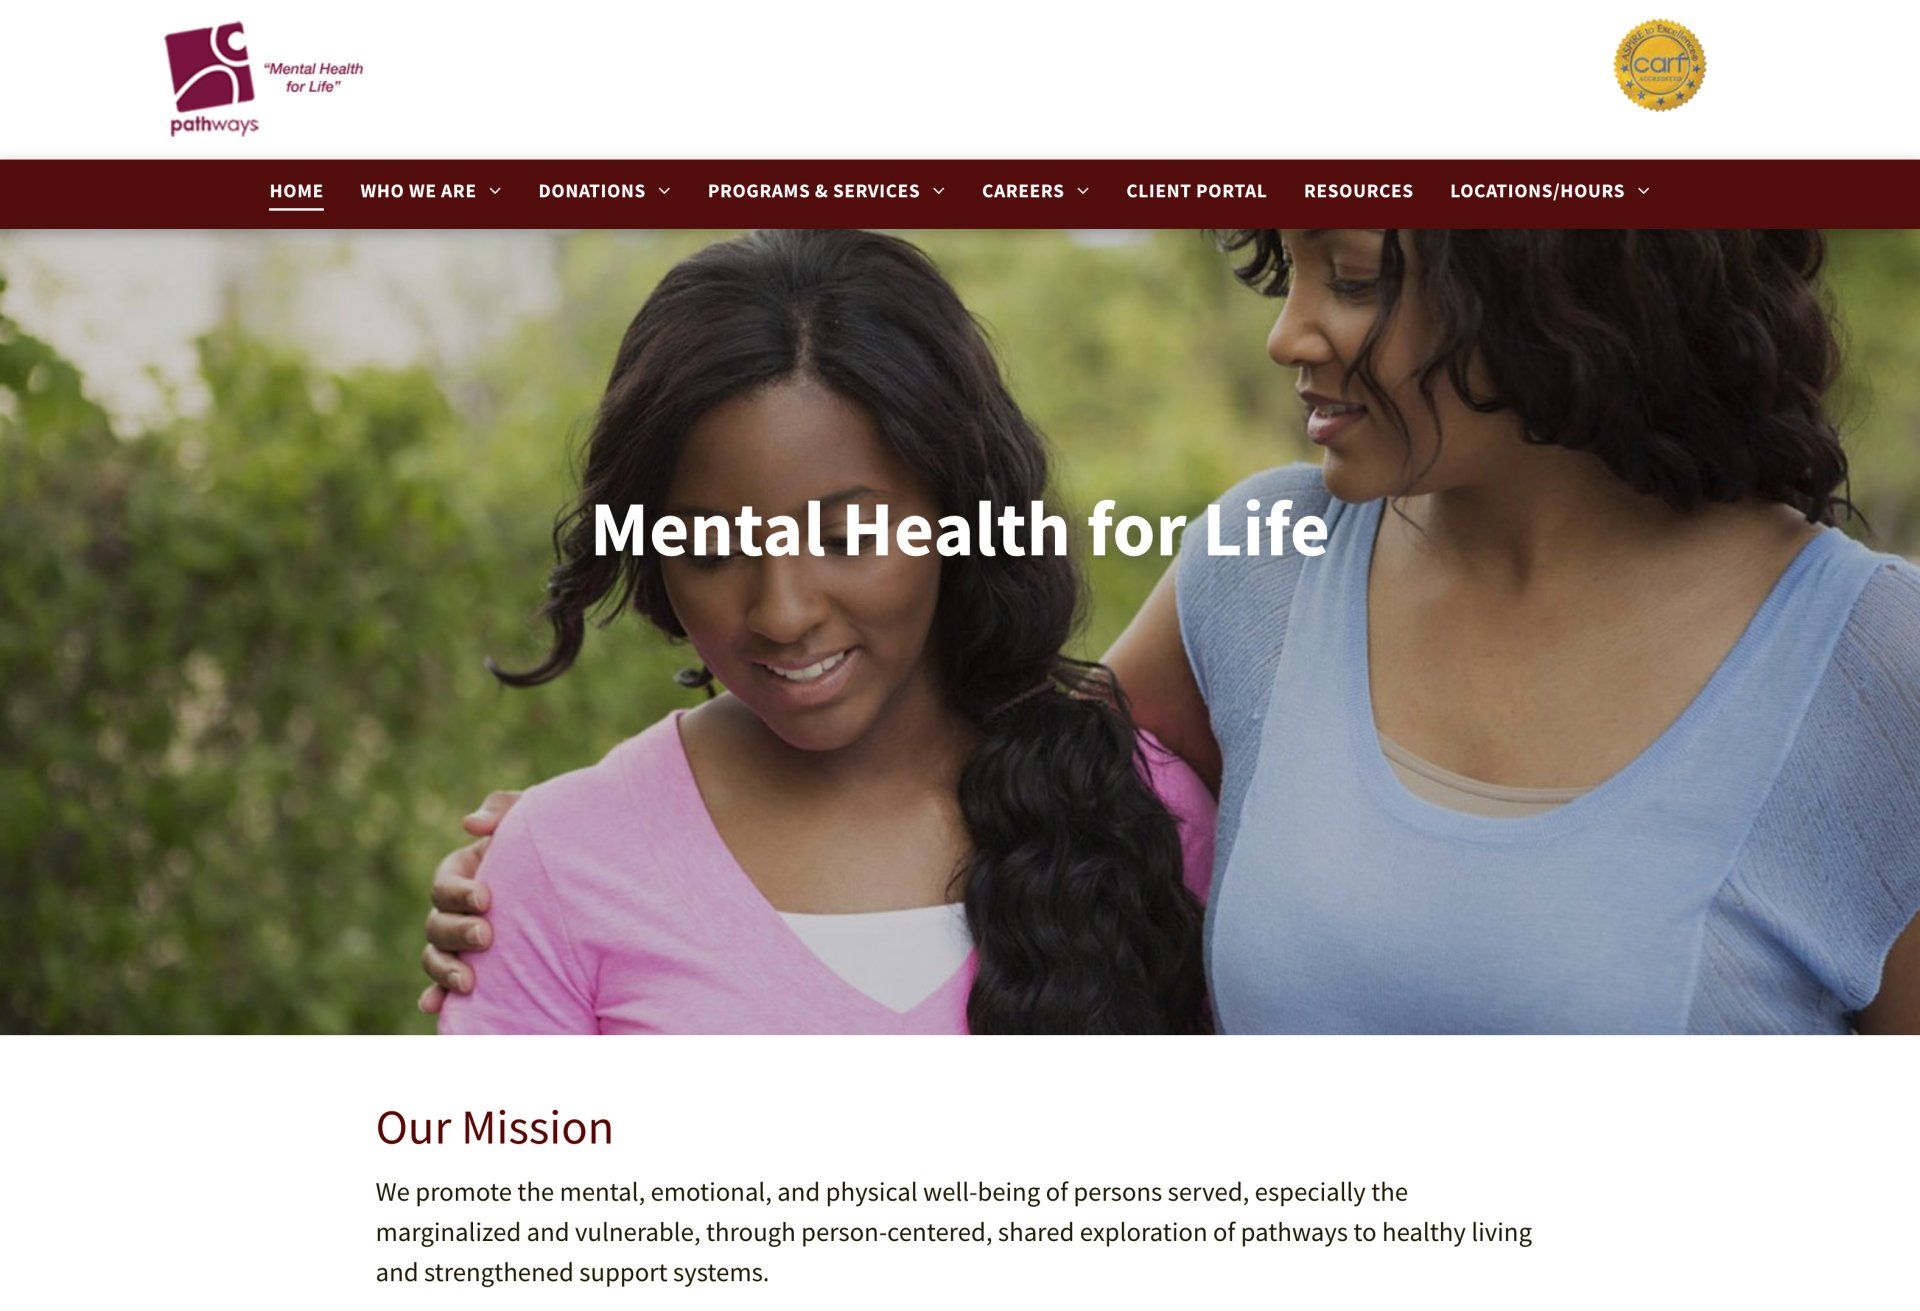 A website for mental health for life shows two women hugging each other.